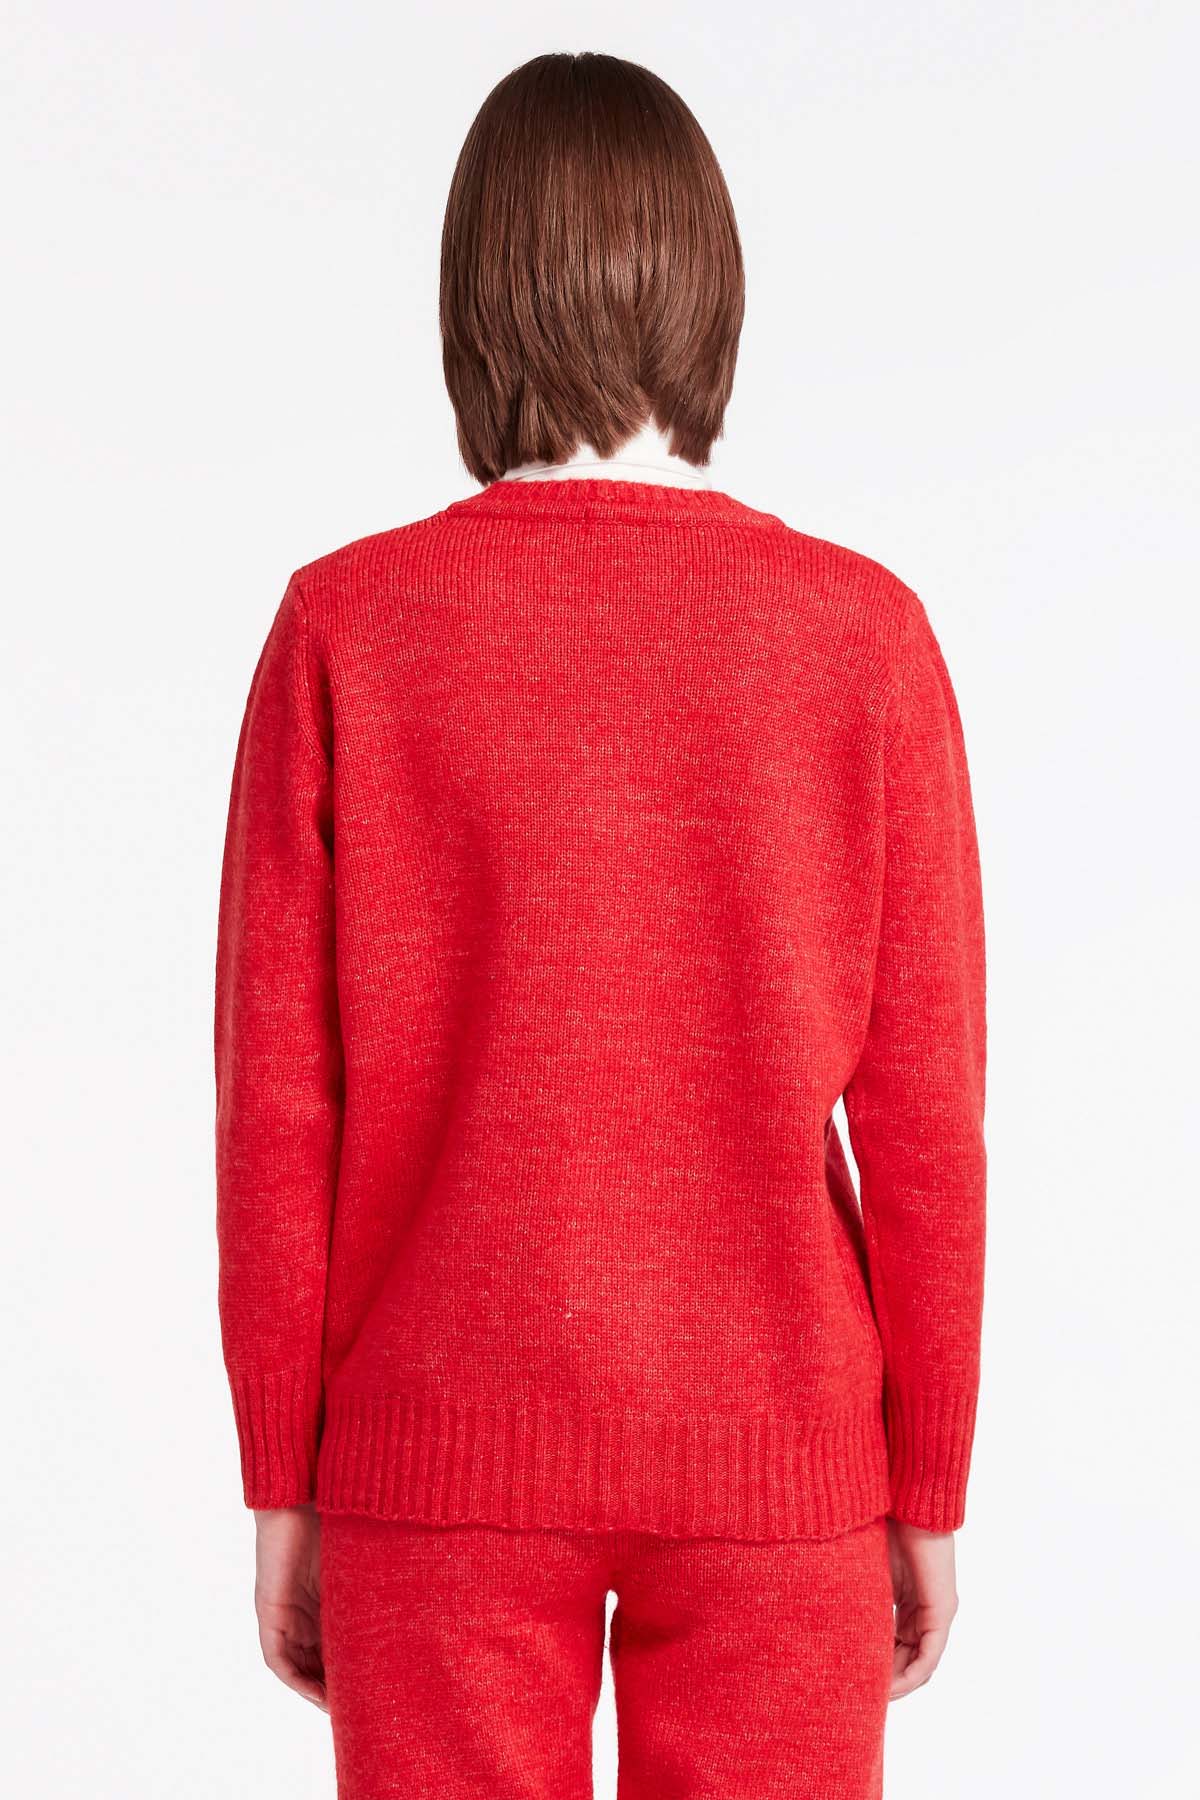 Red V-neck sweater, photo 10